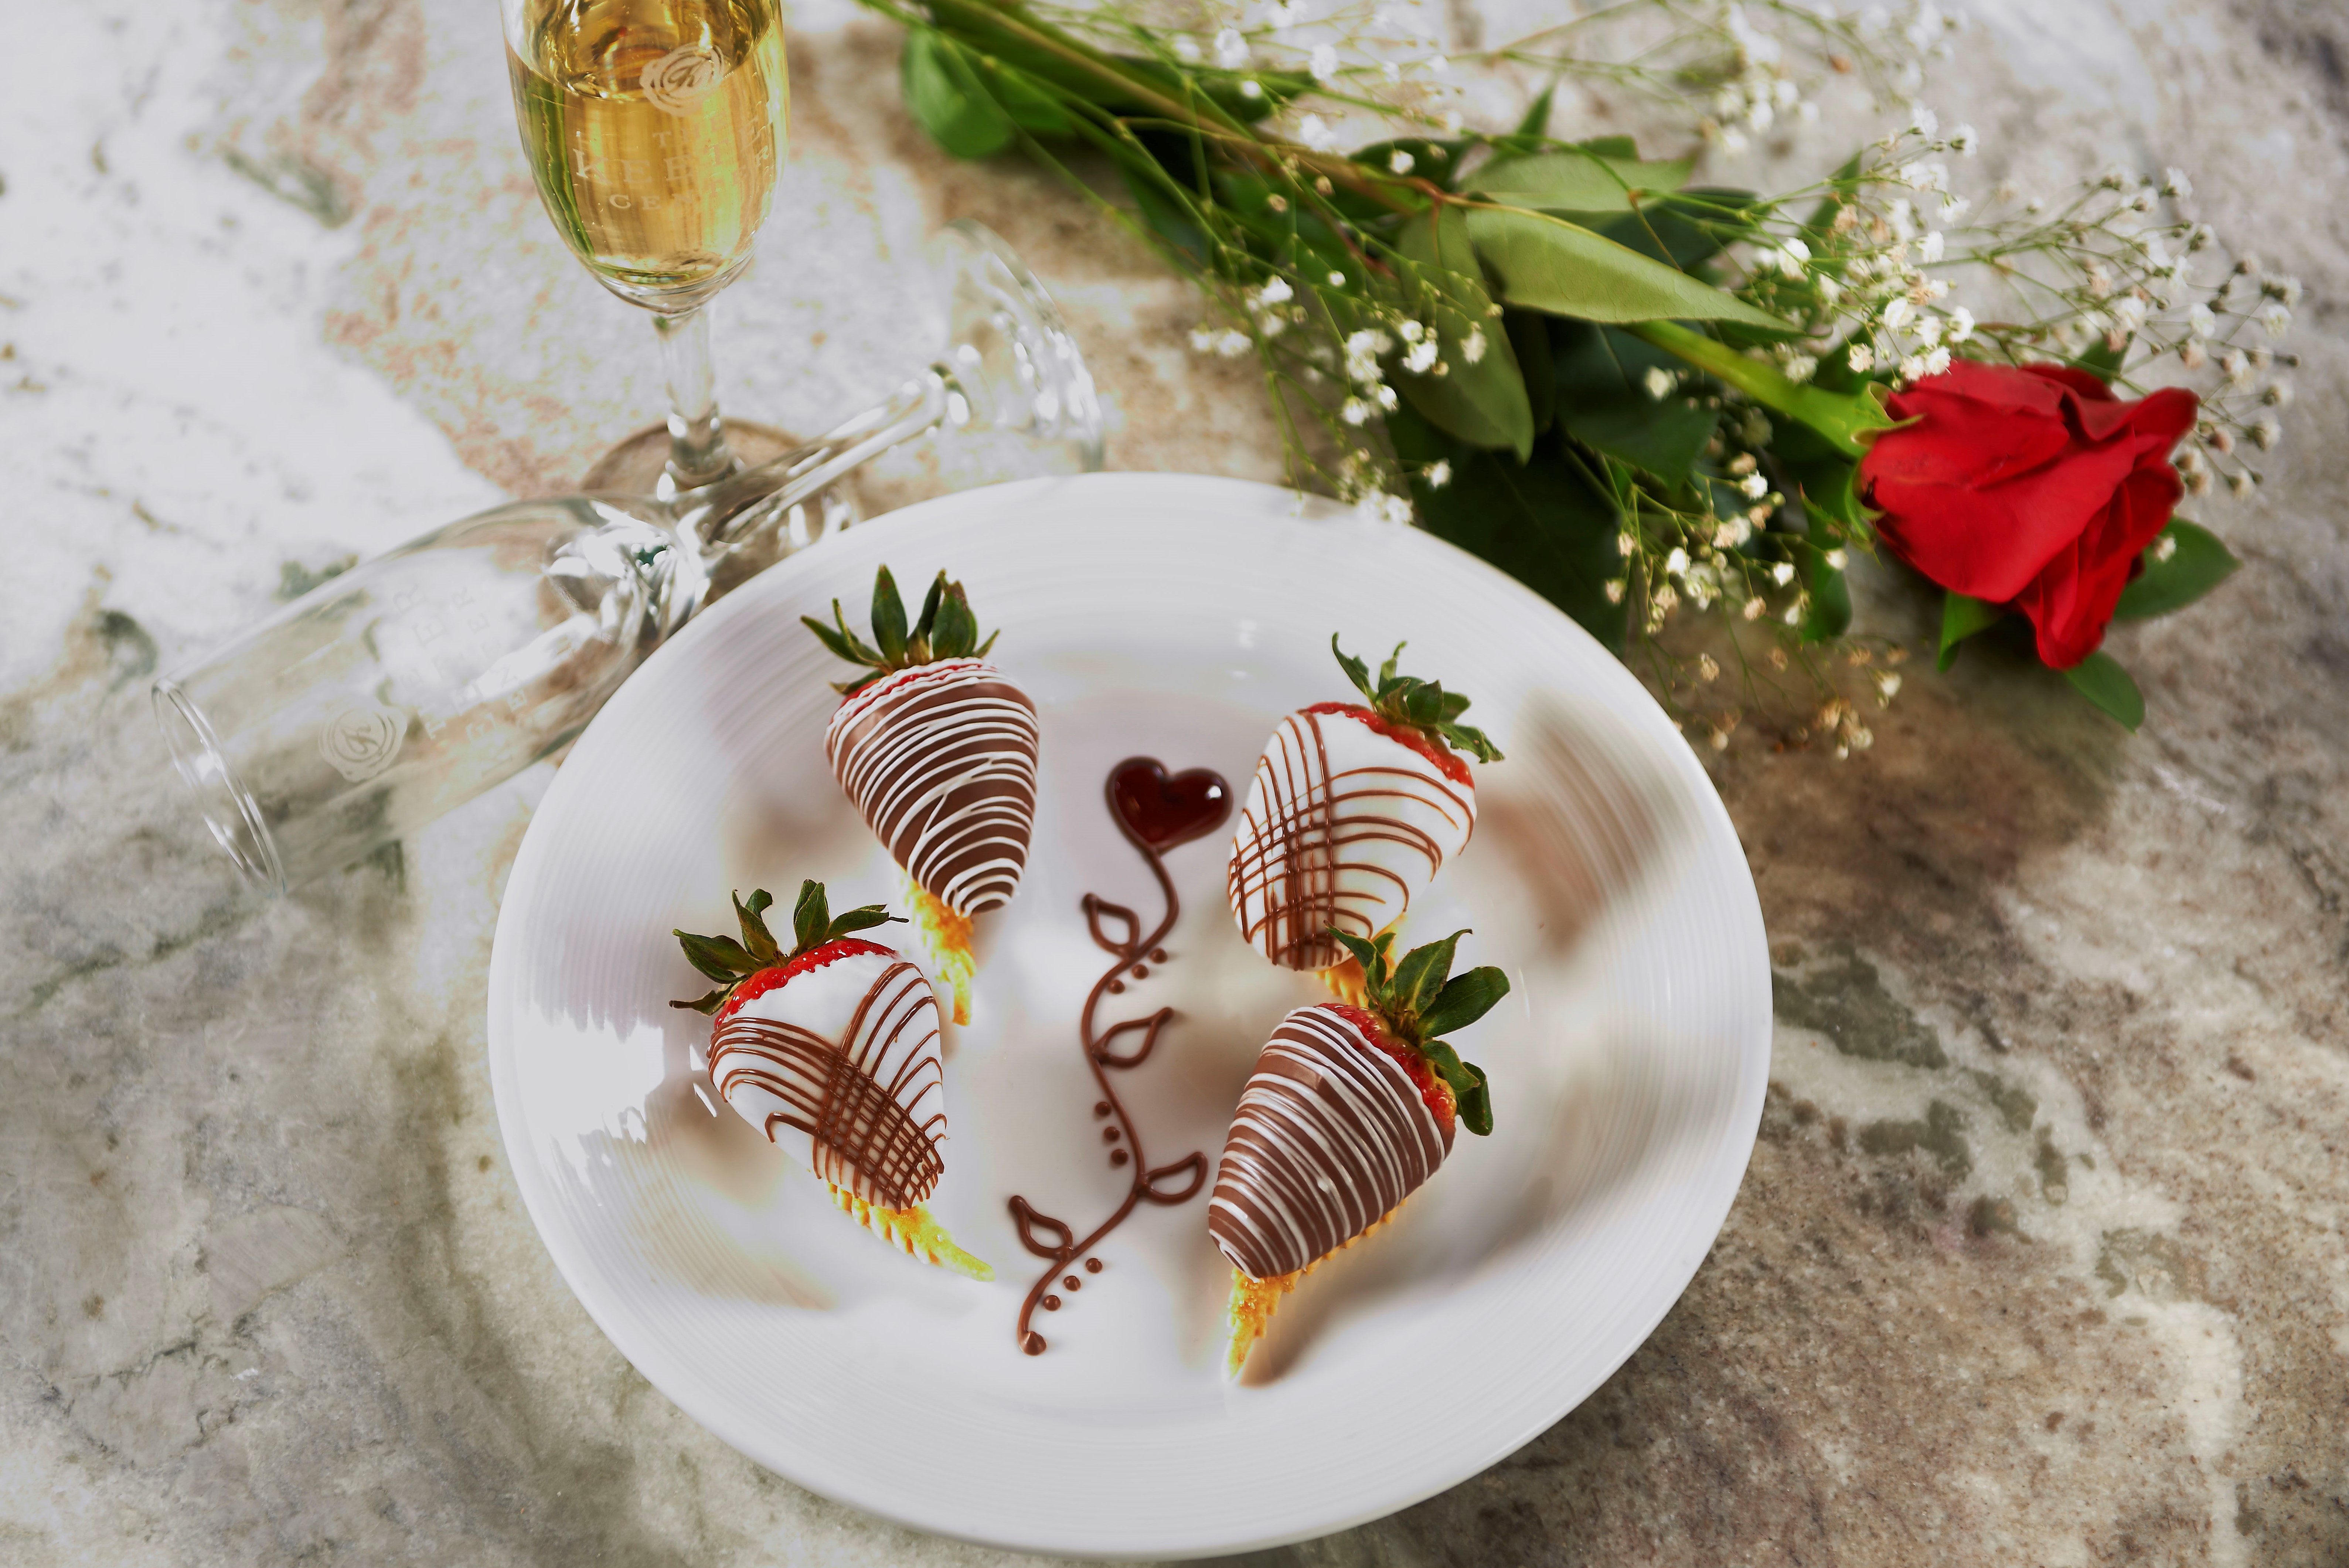 Chocolate strawberries laid out on a plate.